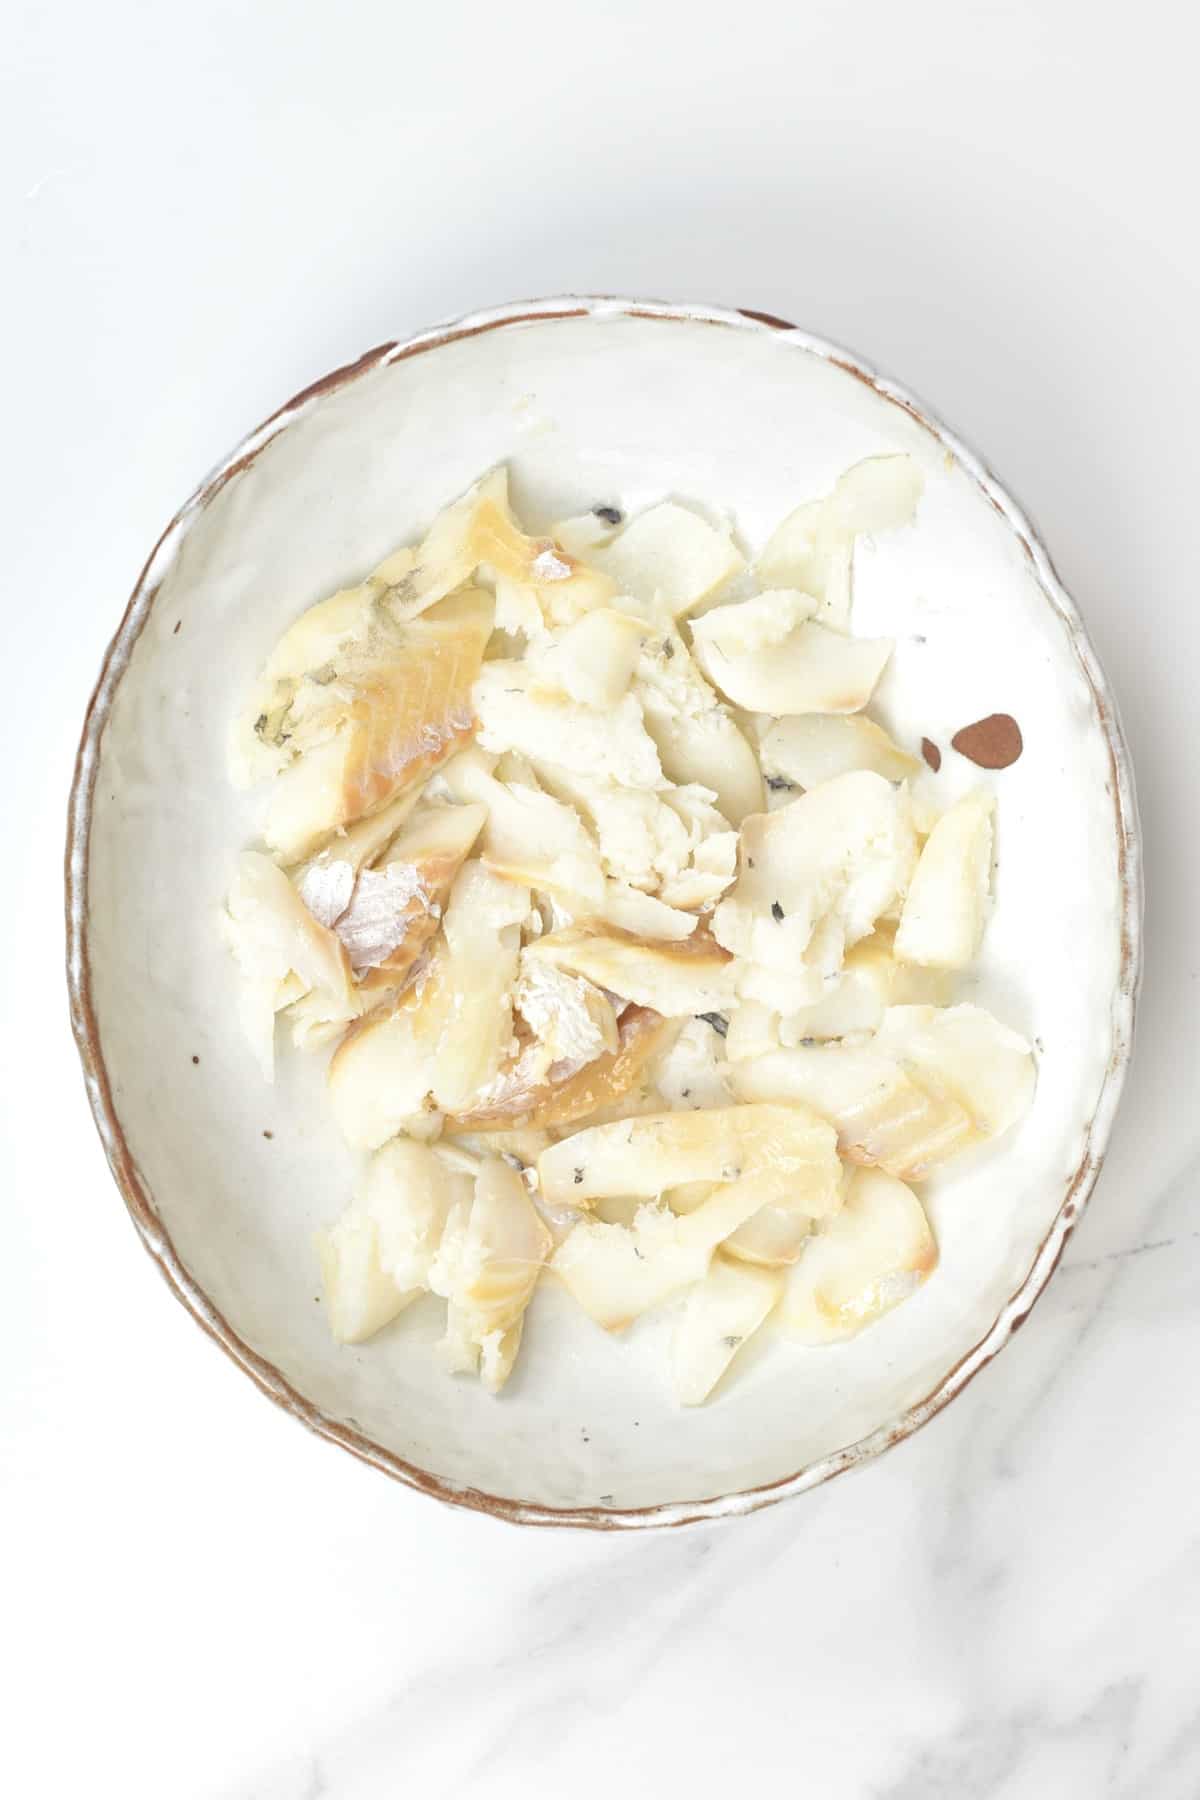 A bowl with cooked salted cod fish